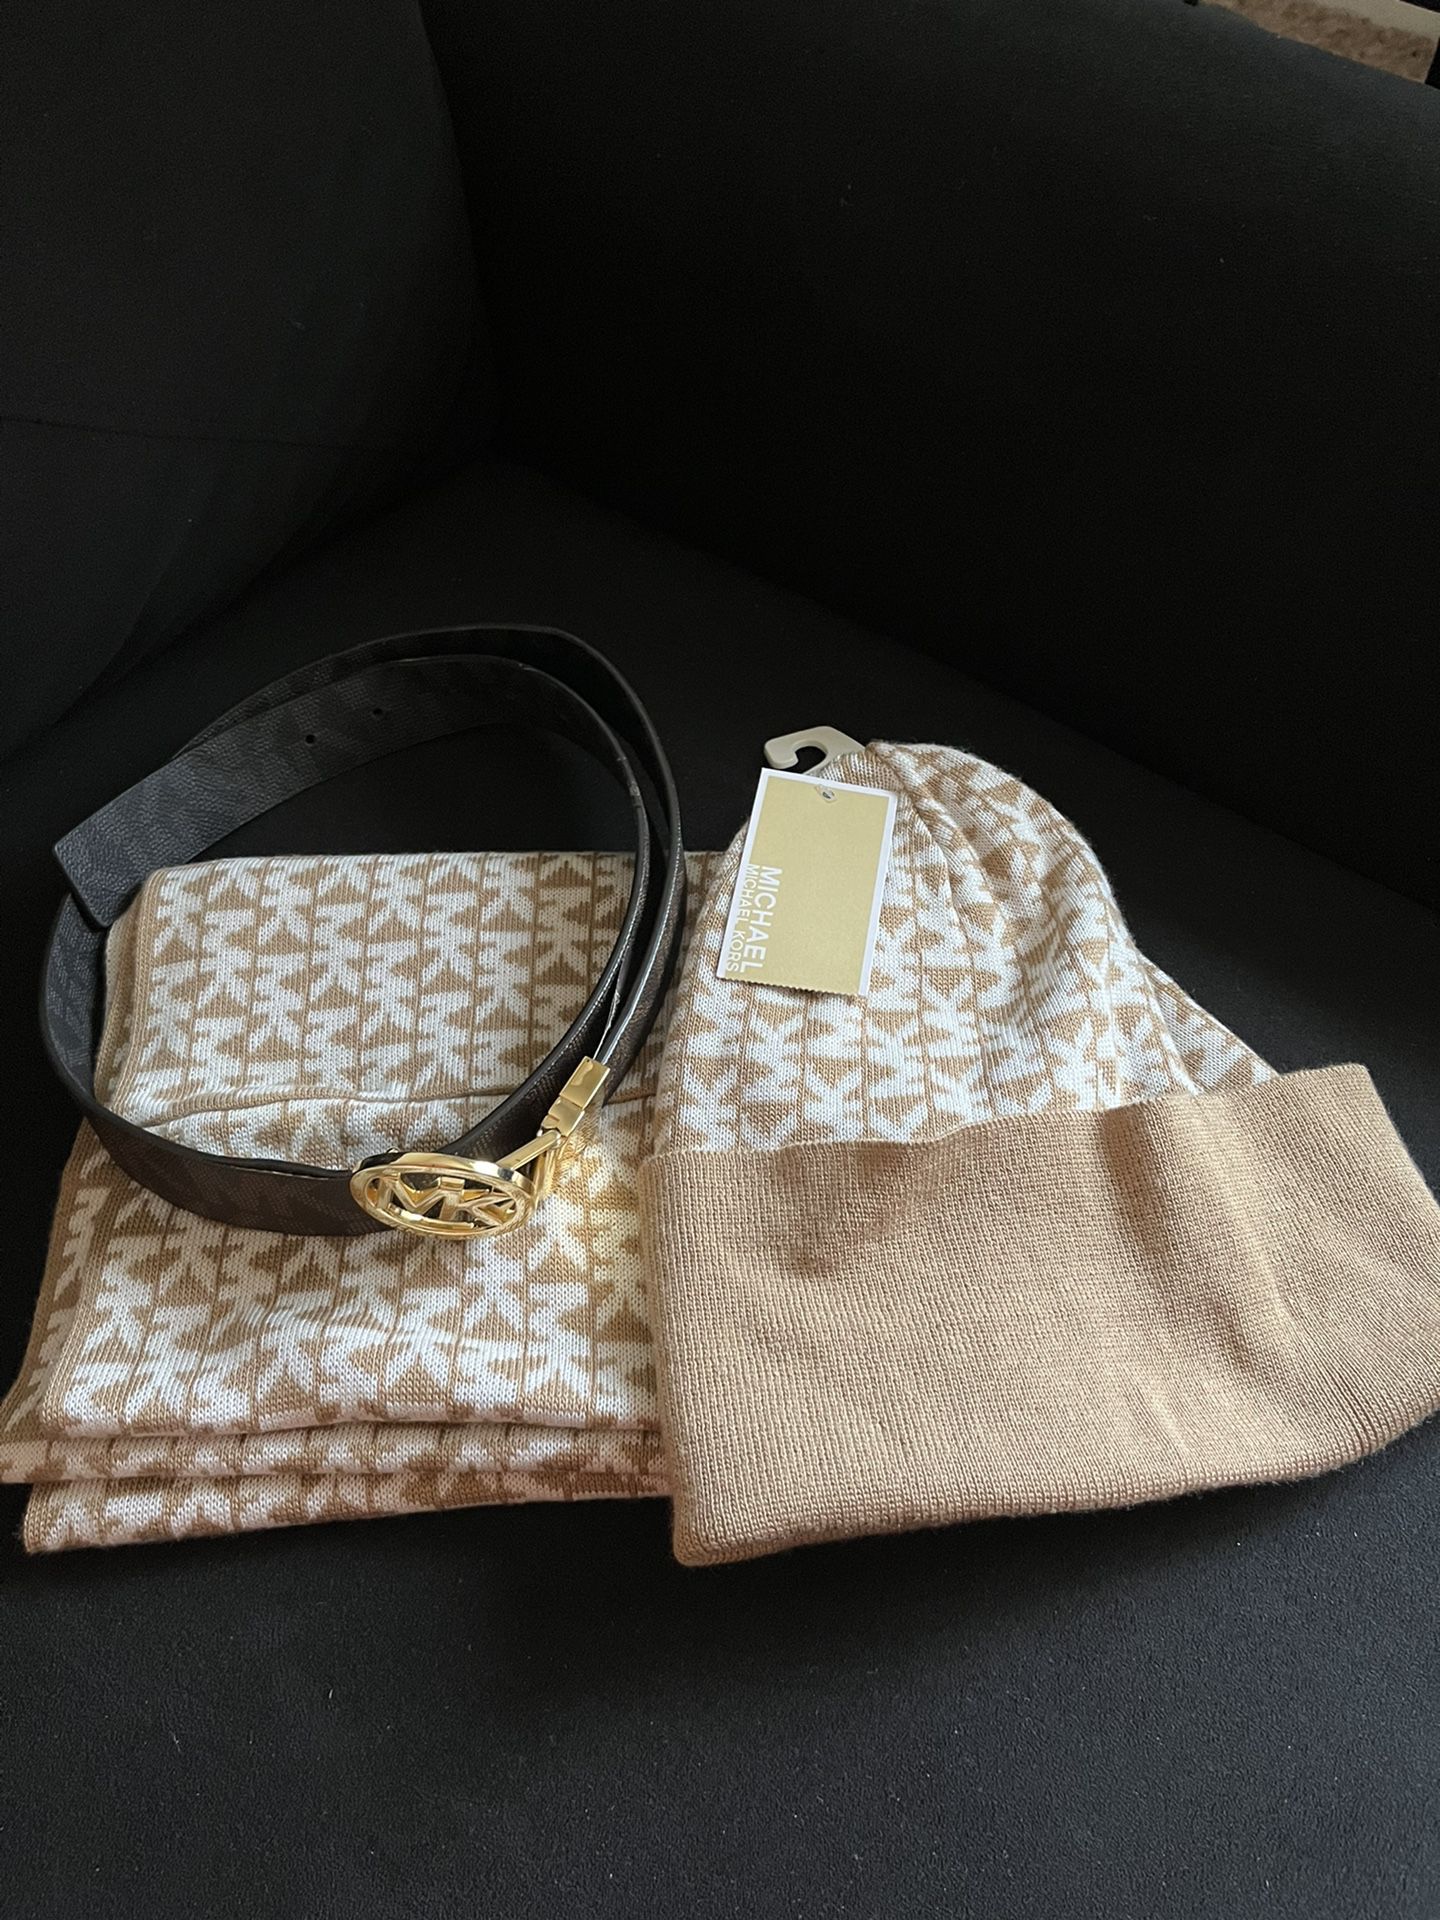 Michael Kors Hat, Scarf, & Belt for Sale in Kent, OH - OfferUp